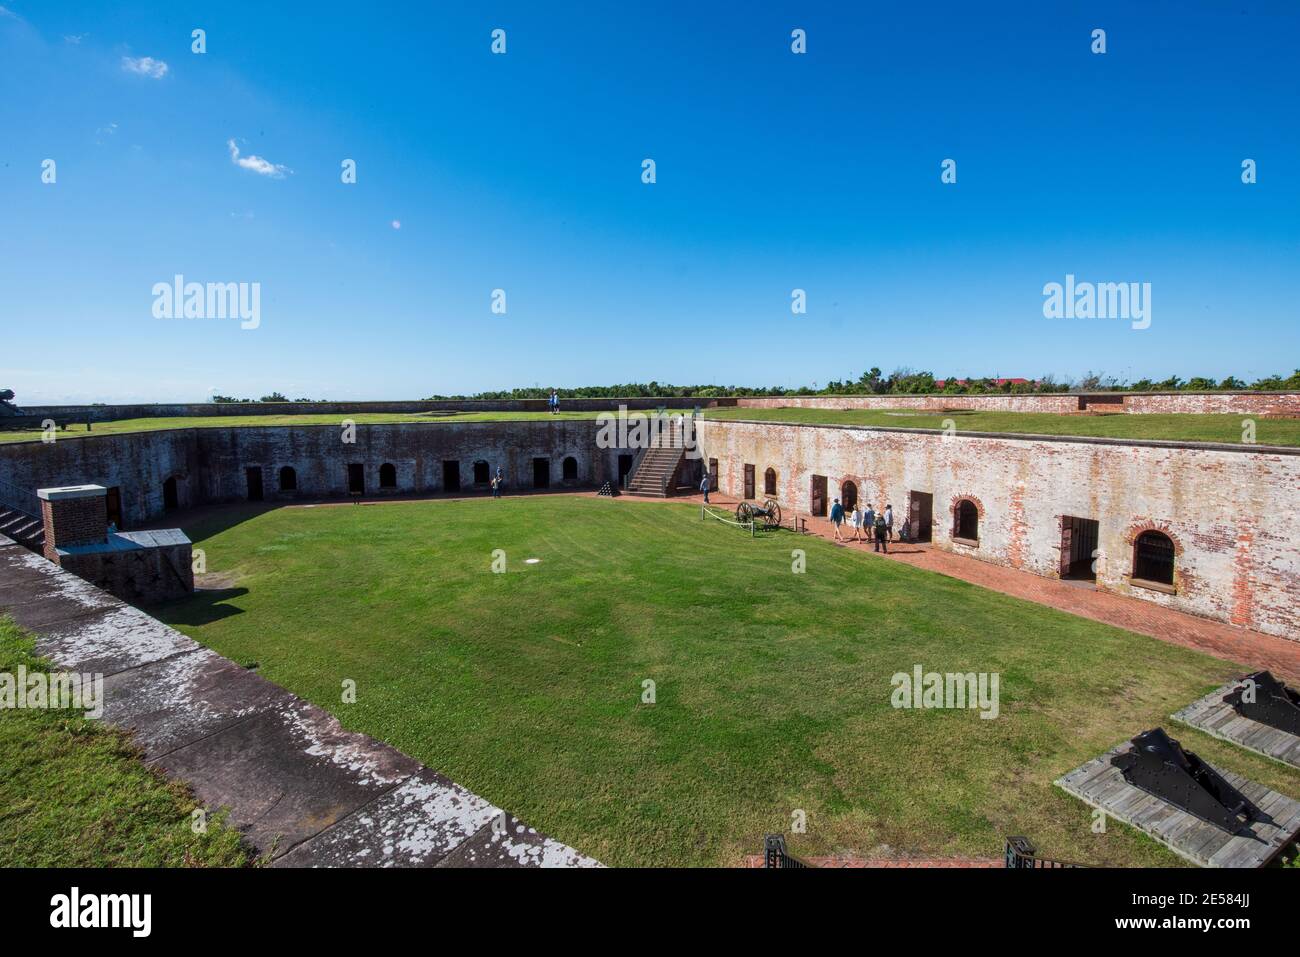 Elevated view of the parade ground at Fort Macon State Park in Atlantic Beach, NC. Fort Macon was constructed after the War of 1812 to defend Beaufort Stock Photo